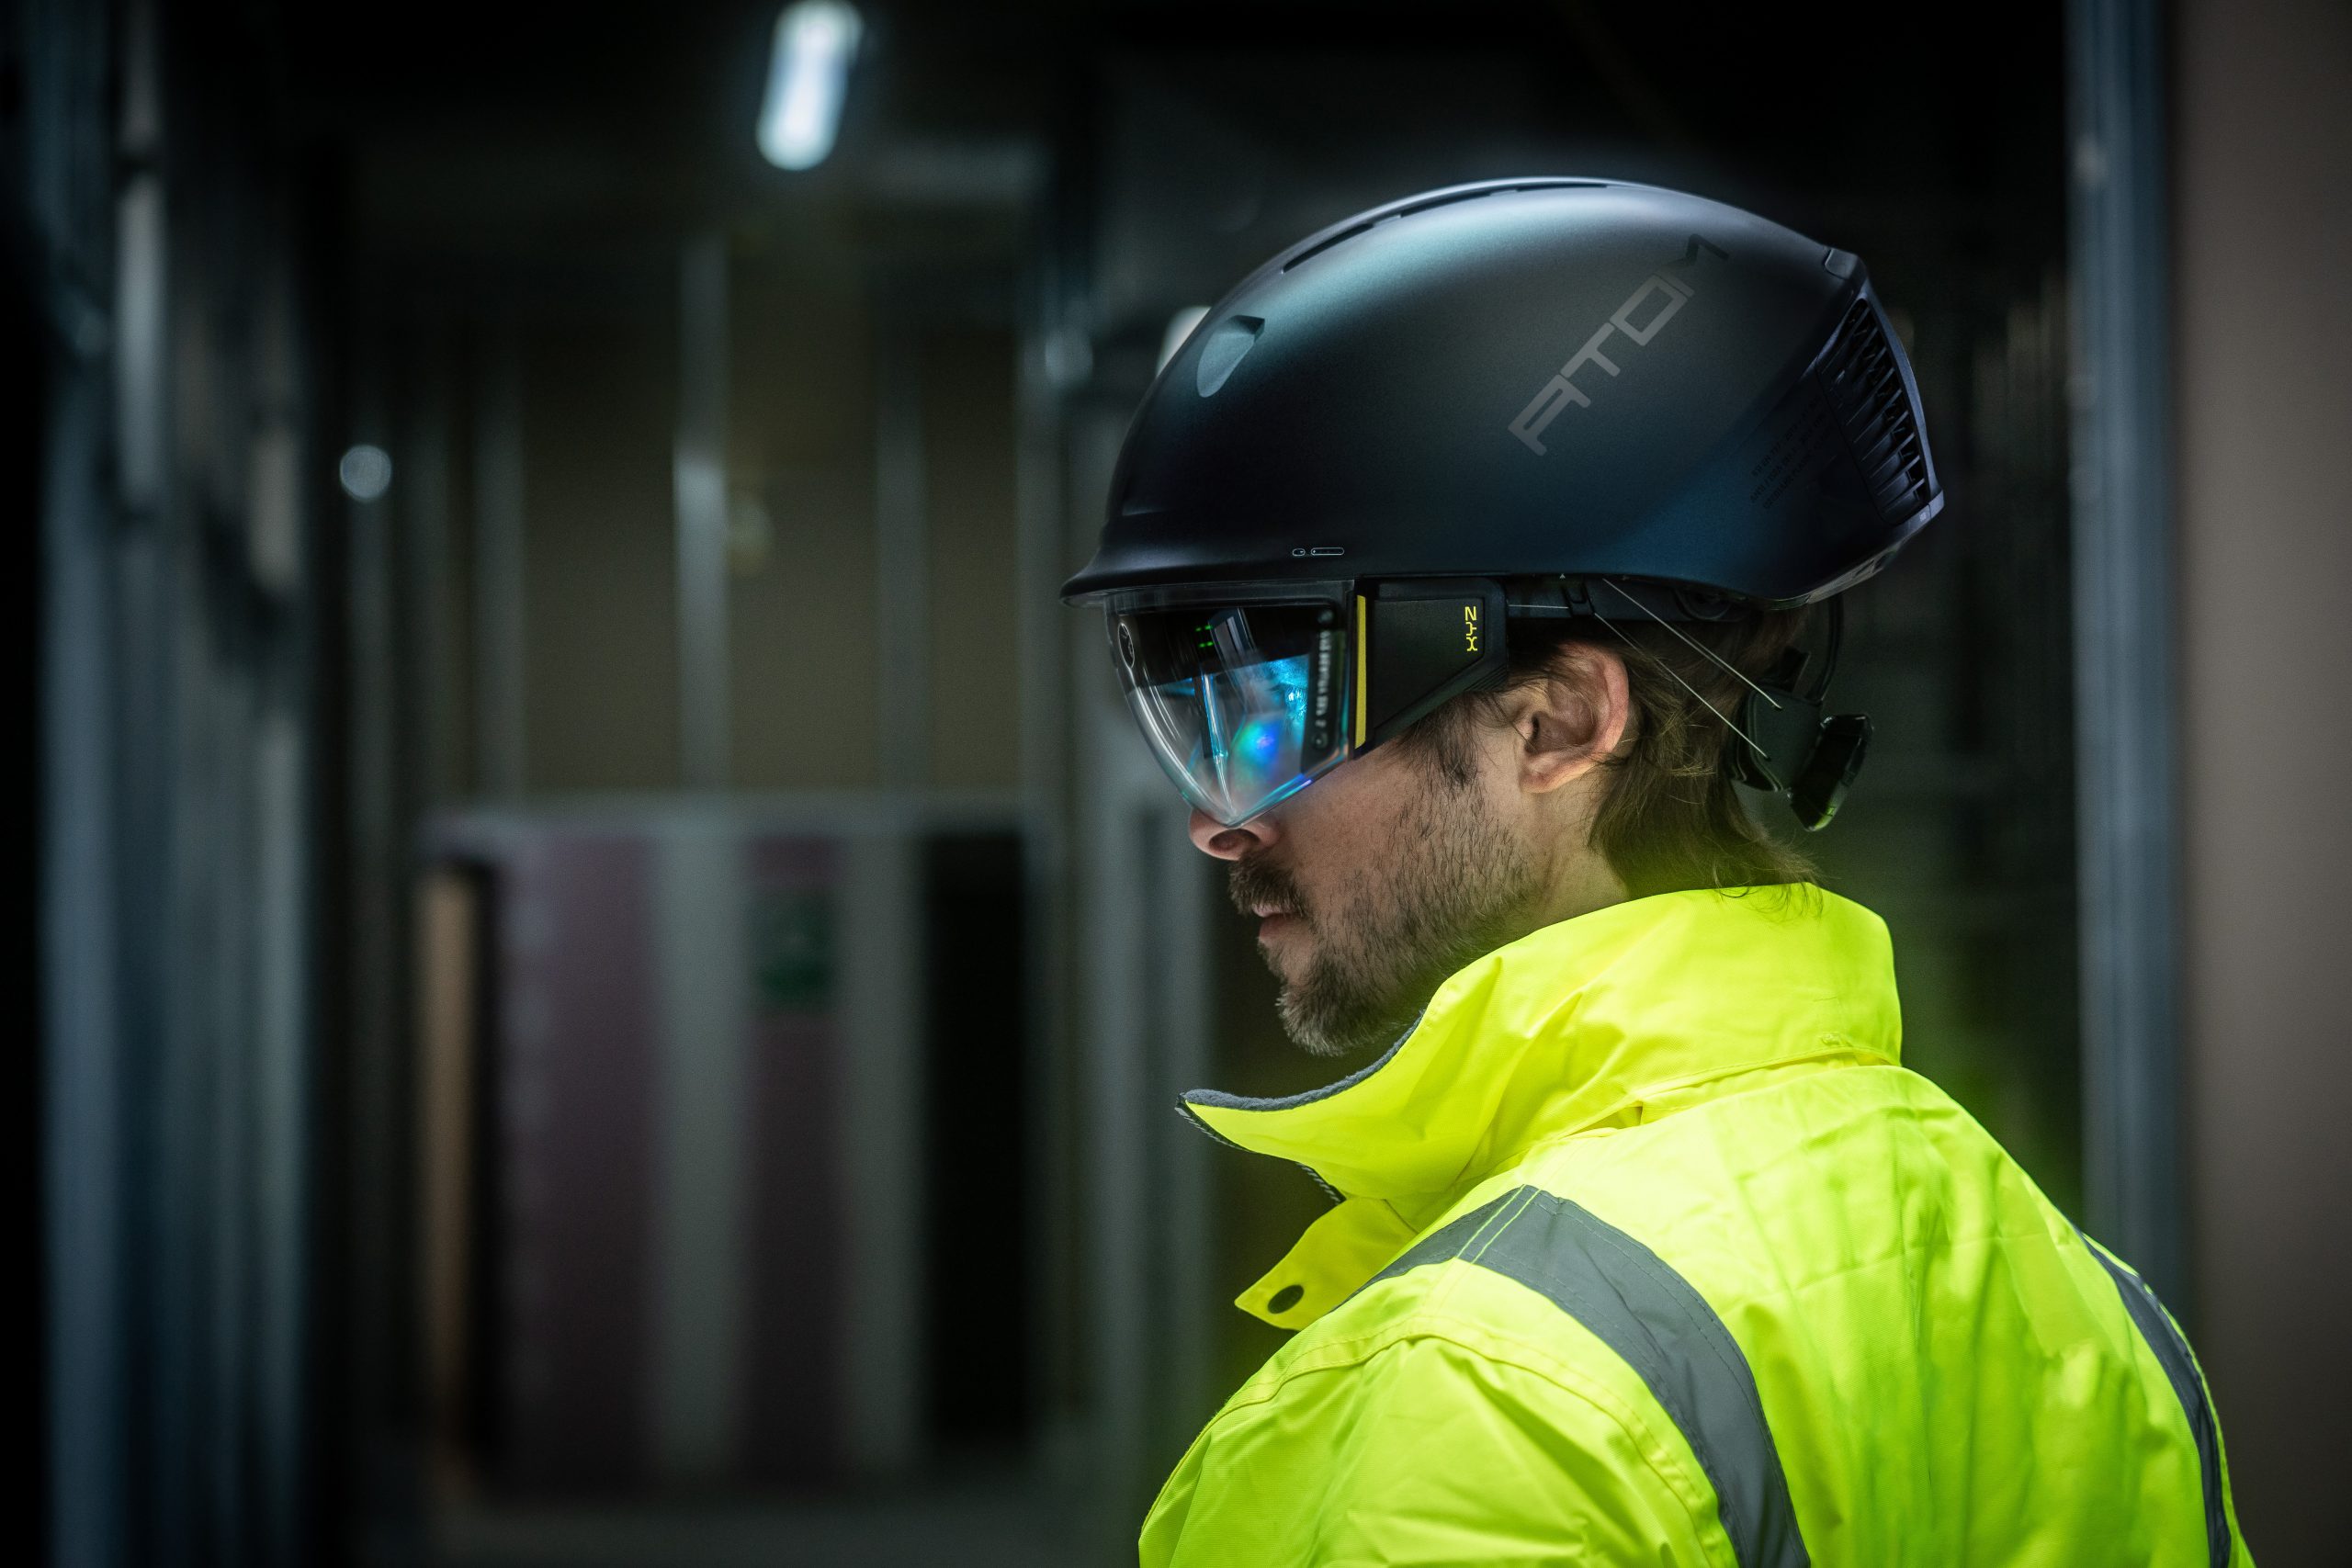 The Atom brings augmented reality to the construction site - Business News